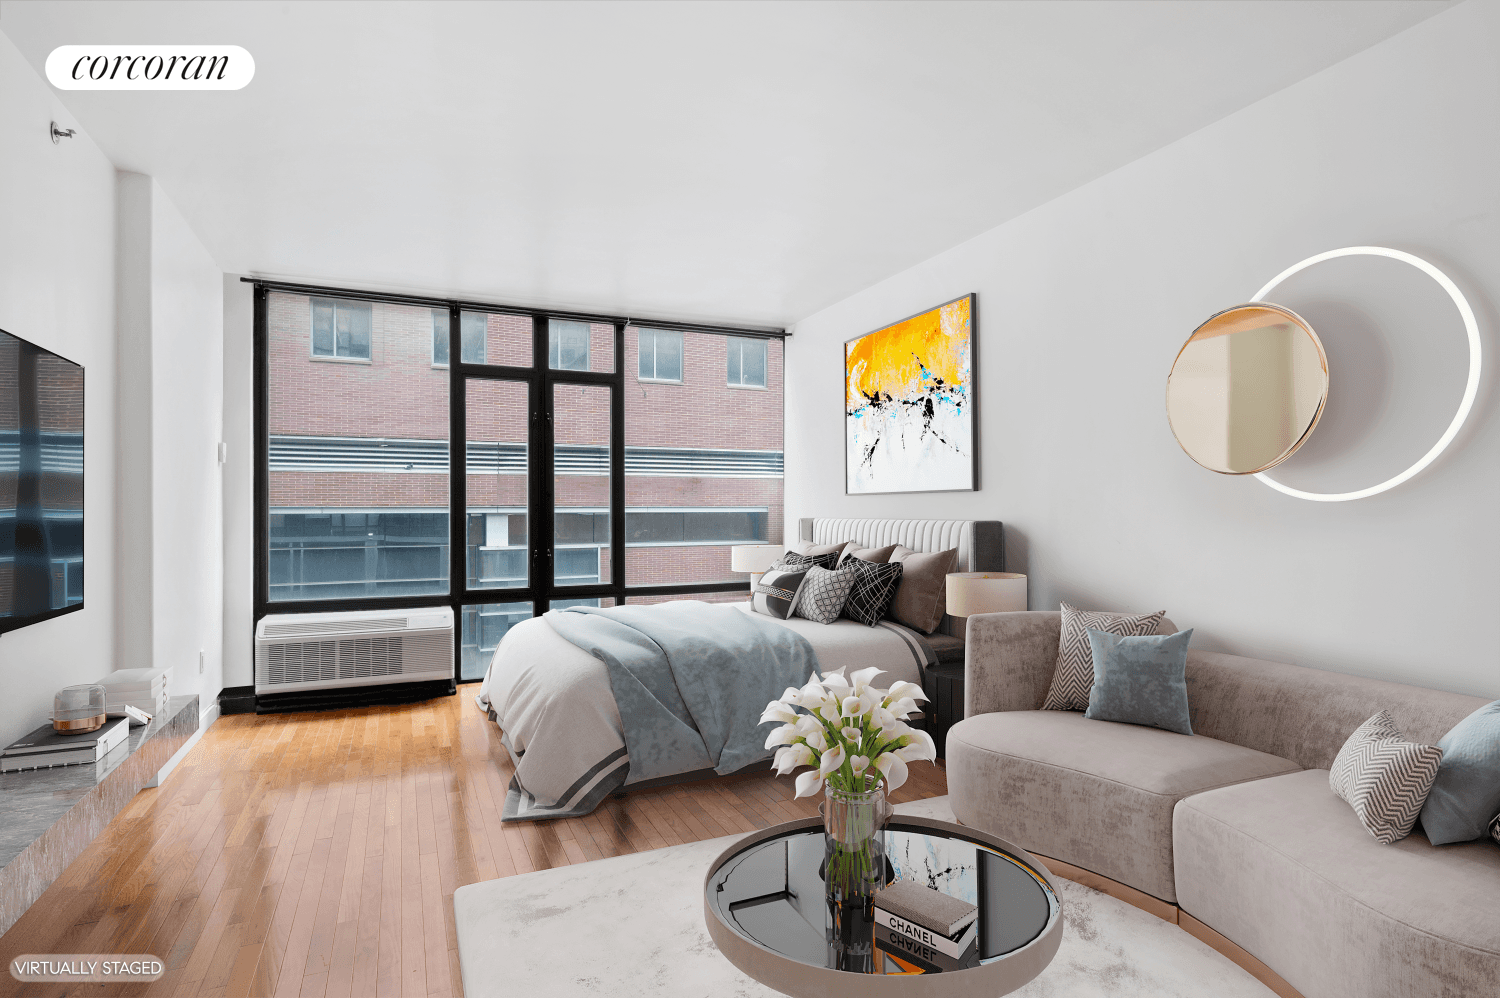 Spring Special ! Mint condition apartment features floor to ceiling double insulated windows that bring delightful natural light throughout the day.